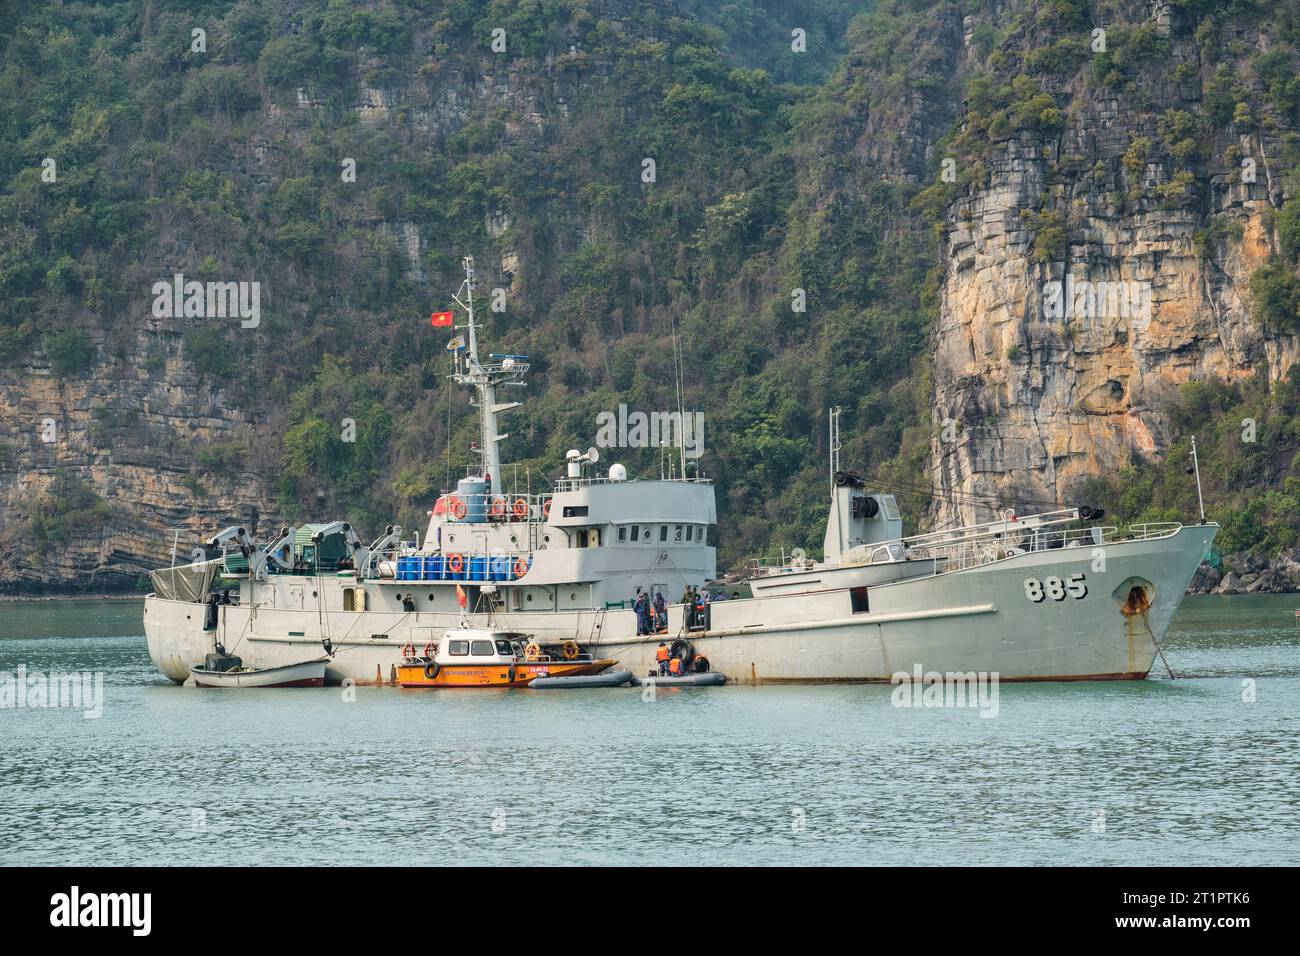 Ha Long Bay, Vietnam. Naval Rescue Boat Searching for Victims of Helicopter Crash. Stock Photo